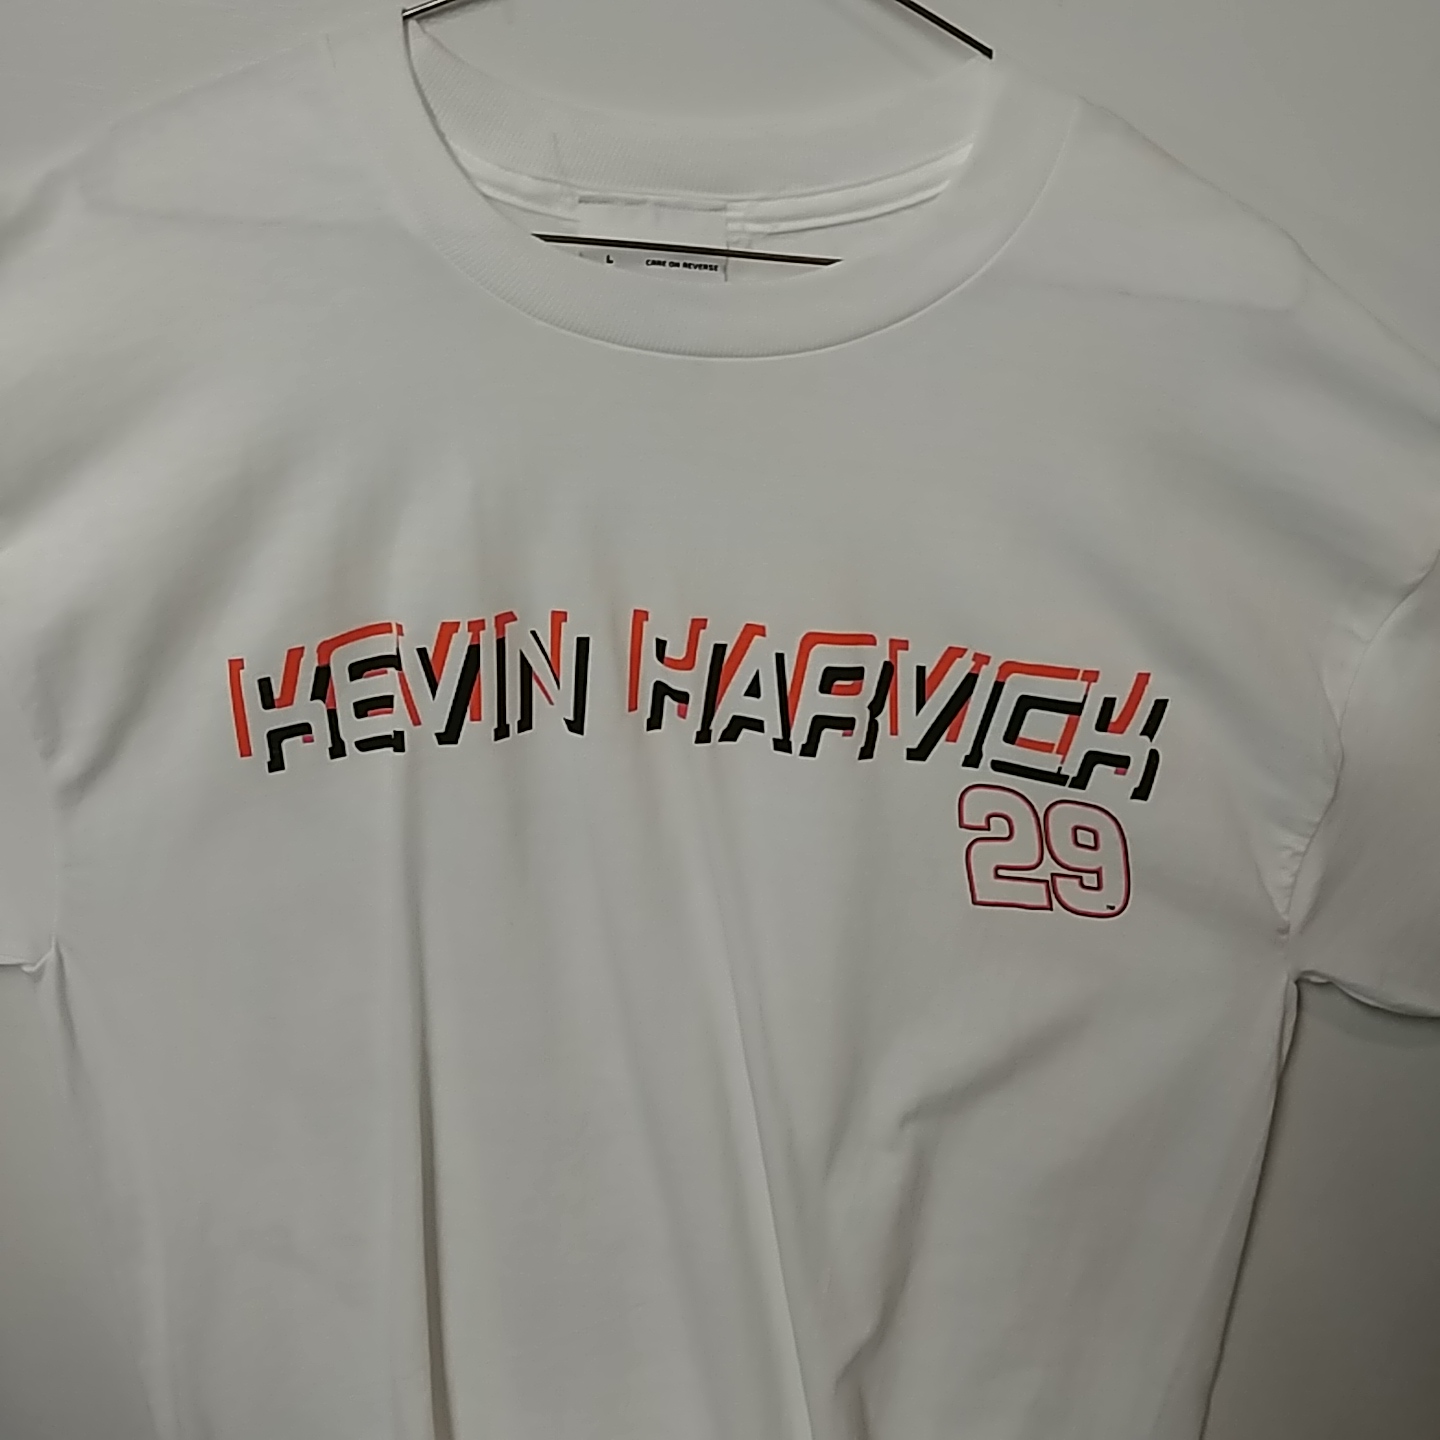 2002 Kevin Harvick GM Goodwrench white  tee